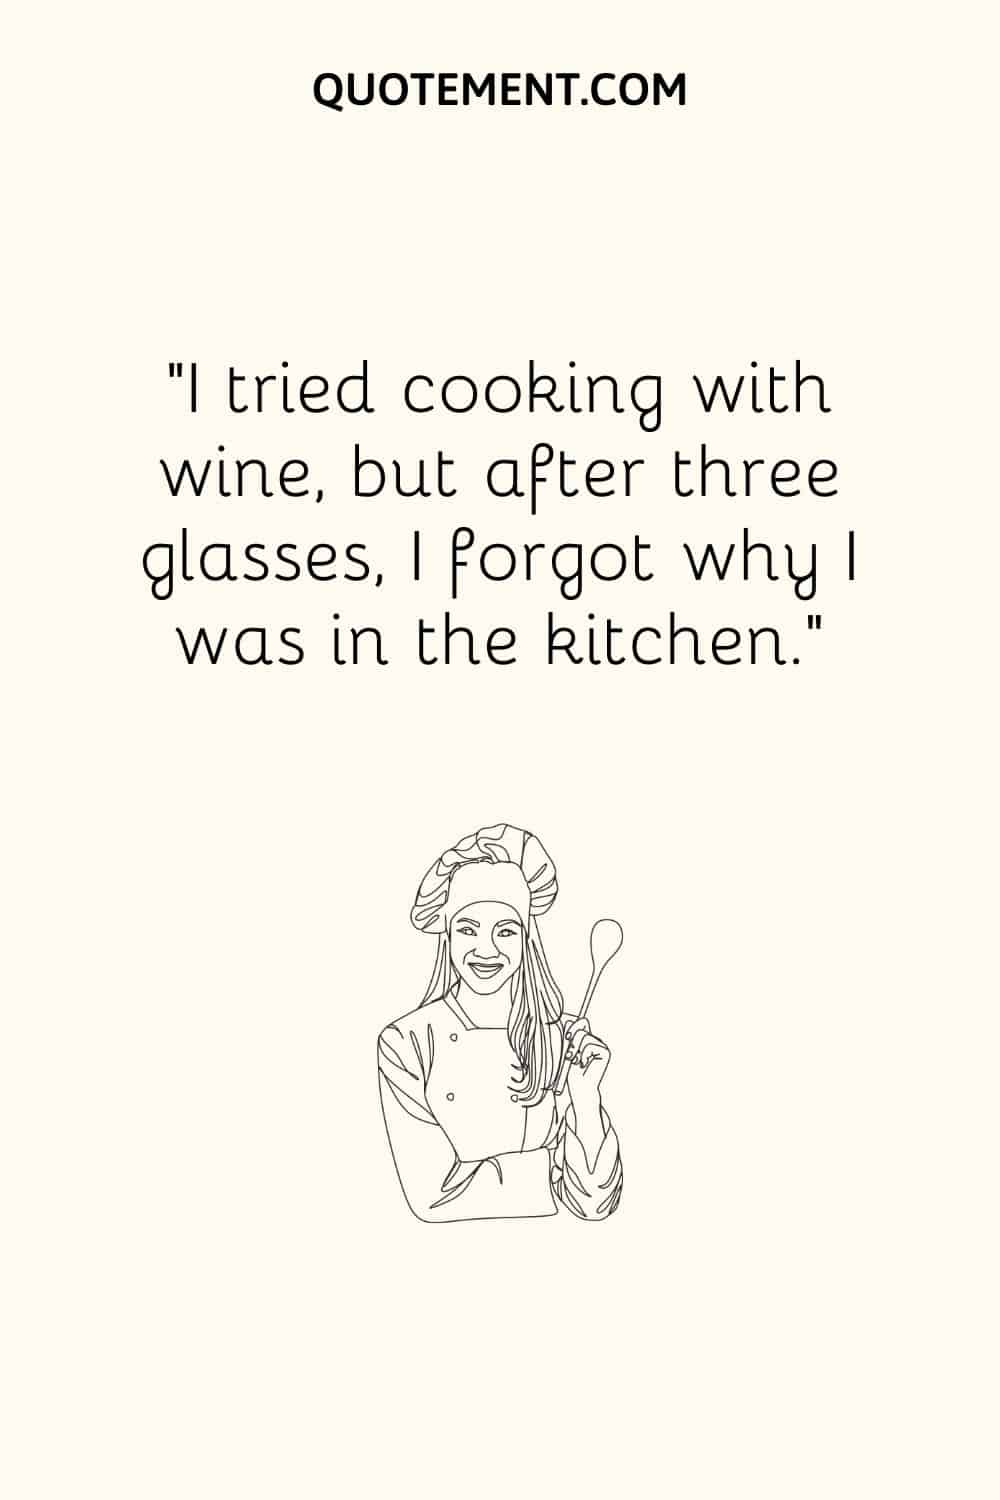 I tried cooking with wine, but after three glasses, I forgot why I was in the kitchen